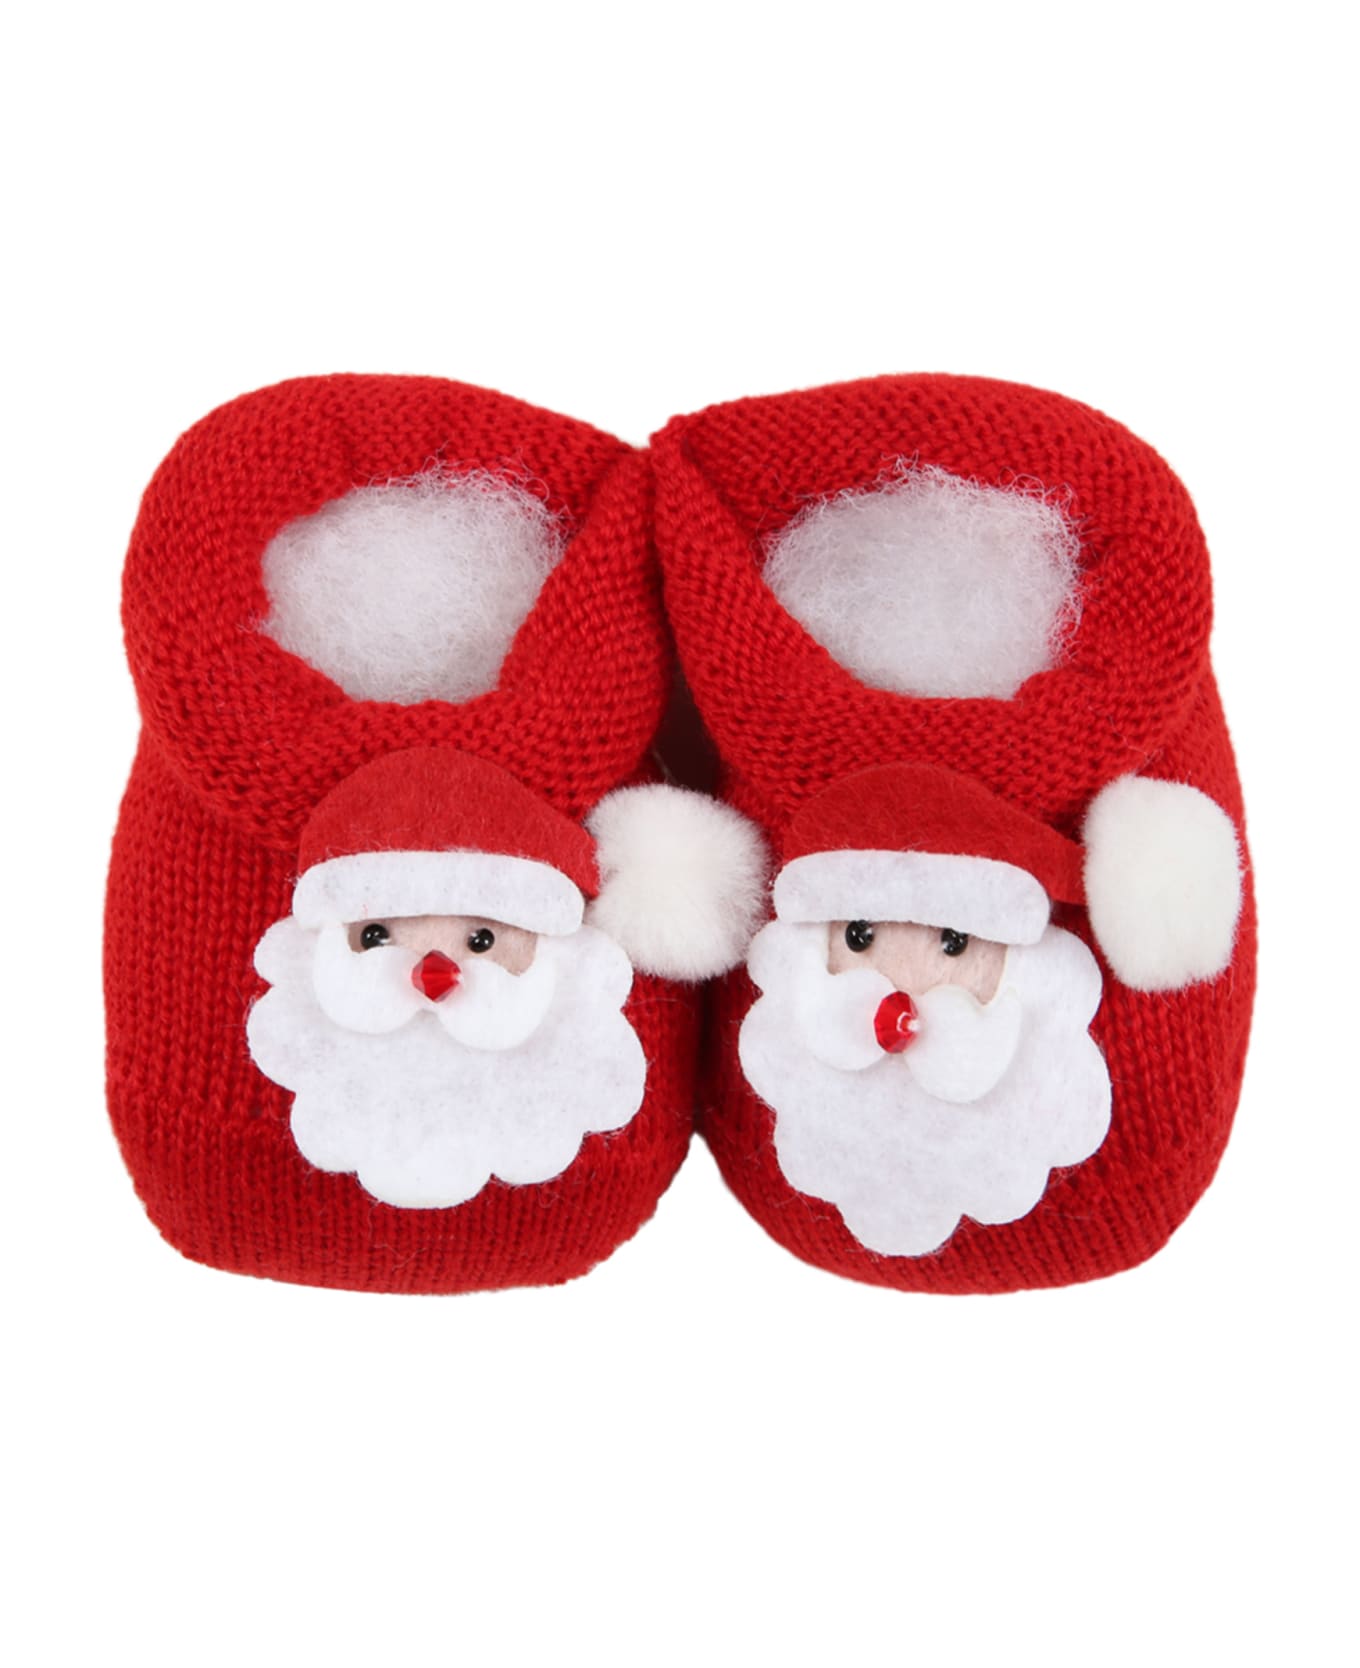 Story Loris Red Set For Babykids With Santa Claus - Red アクセサリー＆ギフト